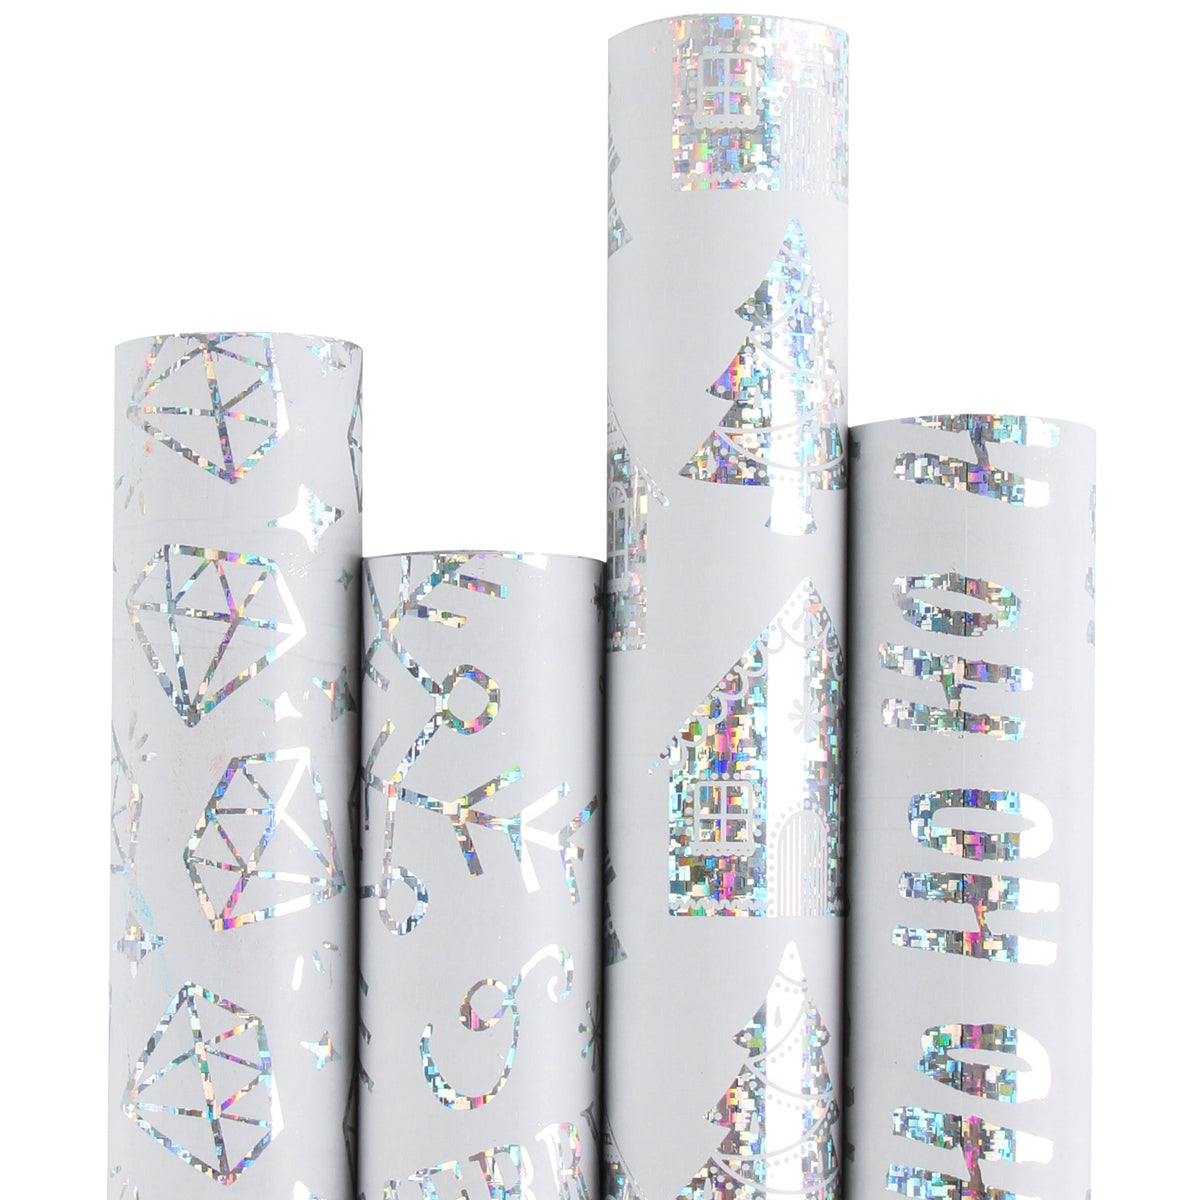 Silver Diamond Pattern Wrapping Paper #silver #shiny #classy #feminine  #bling#giftwrapping#wra…